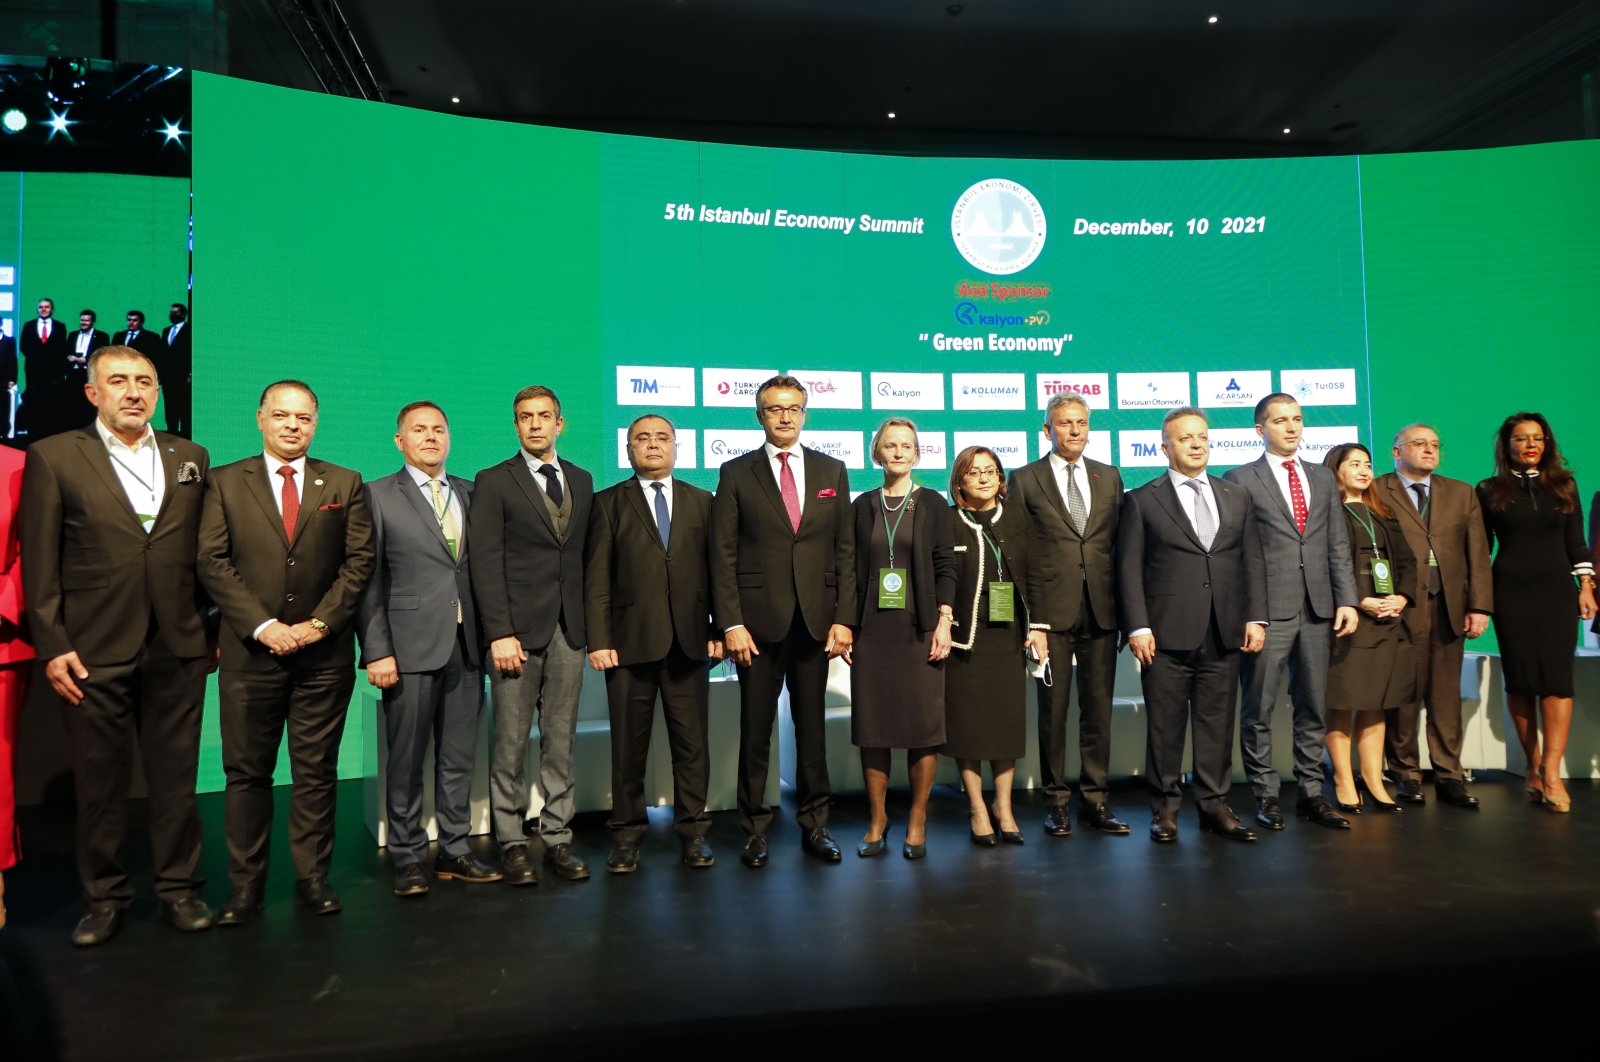 Officials, executives and private sector representatives during the opening ceremony of Istanbul Economy Summit, Istanbul, Turkey, Dec. 10, 2021. (Courtesy of the Istanbul Economy Summit)